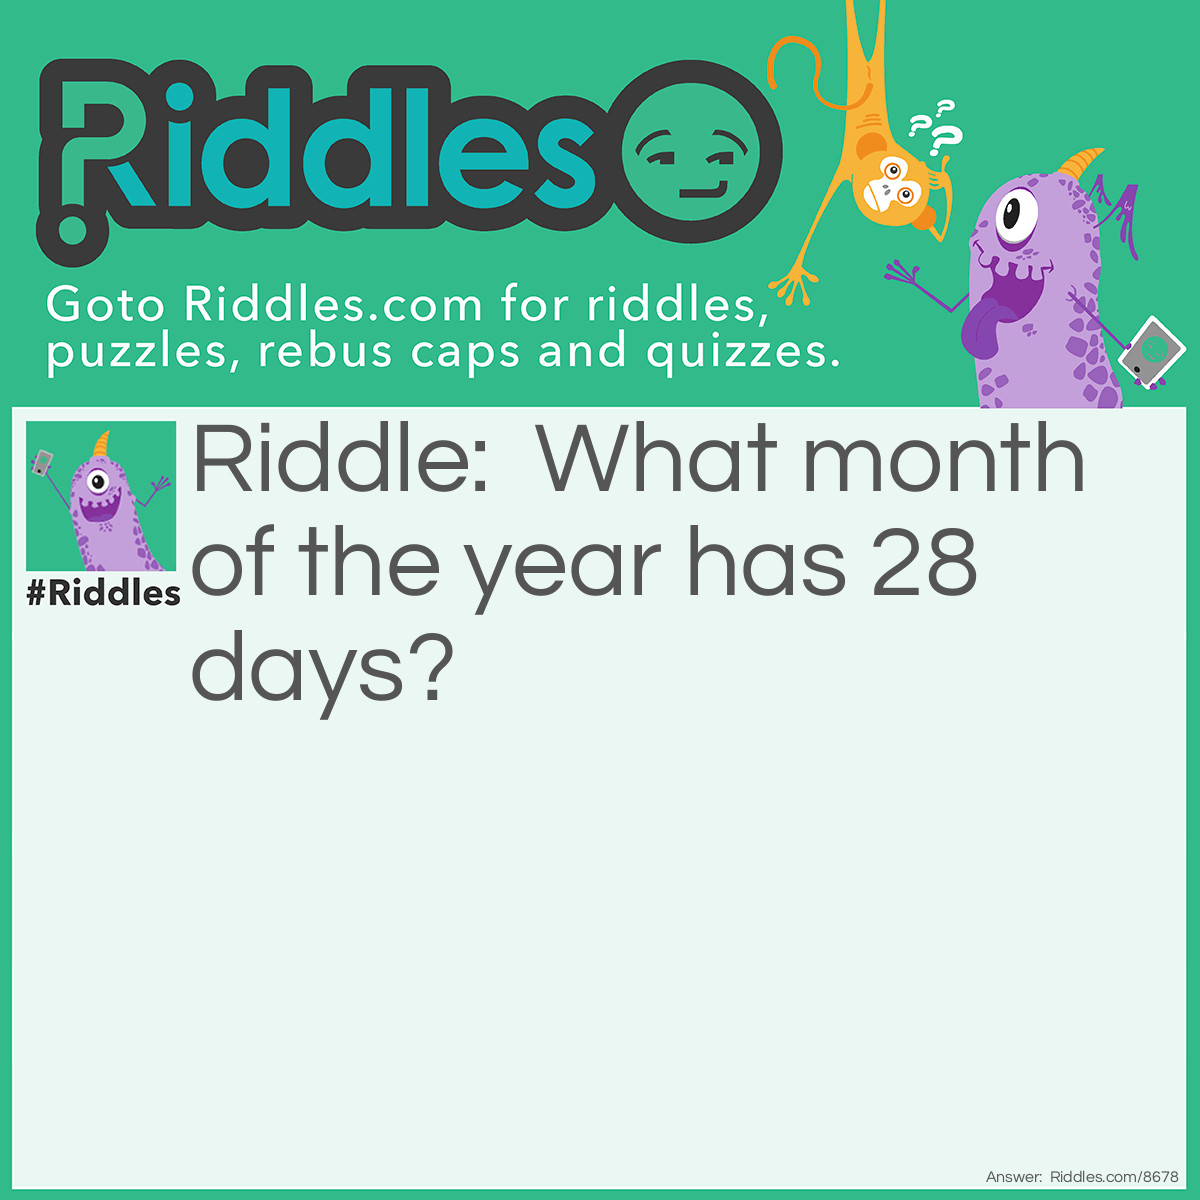 Riddle: What month of the year has 28 days? Answer: All of them